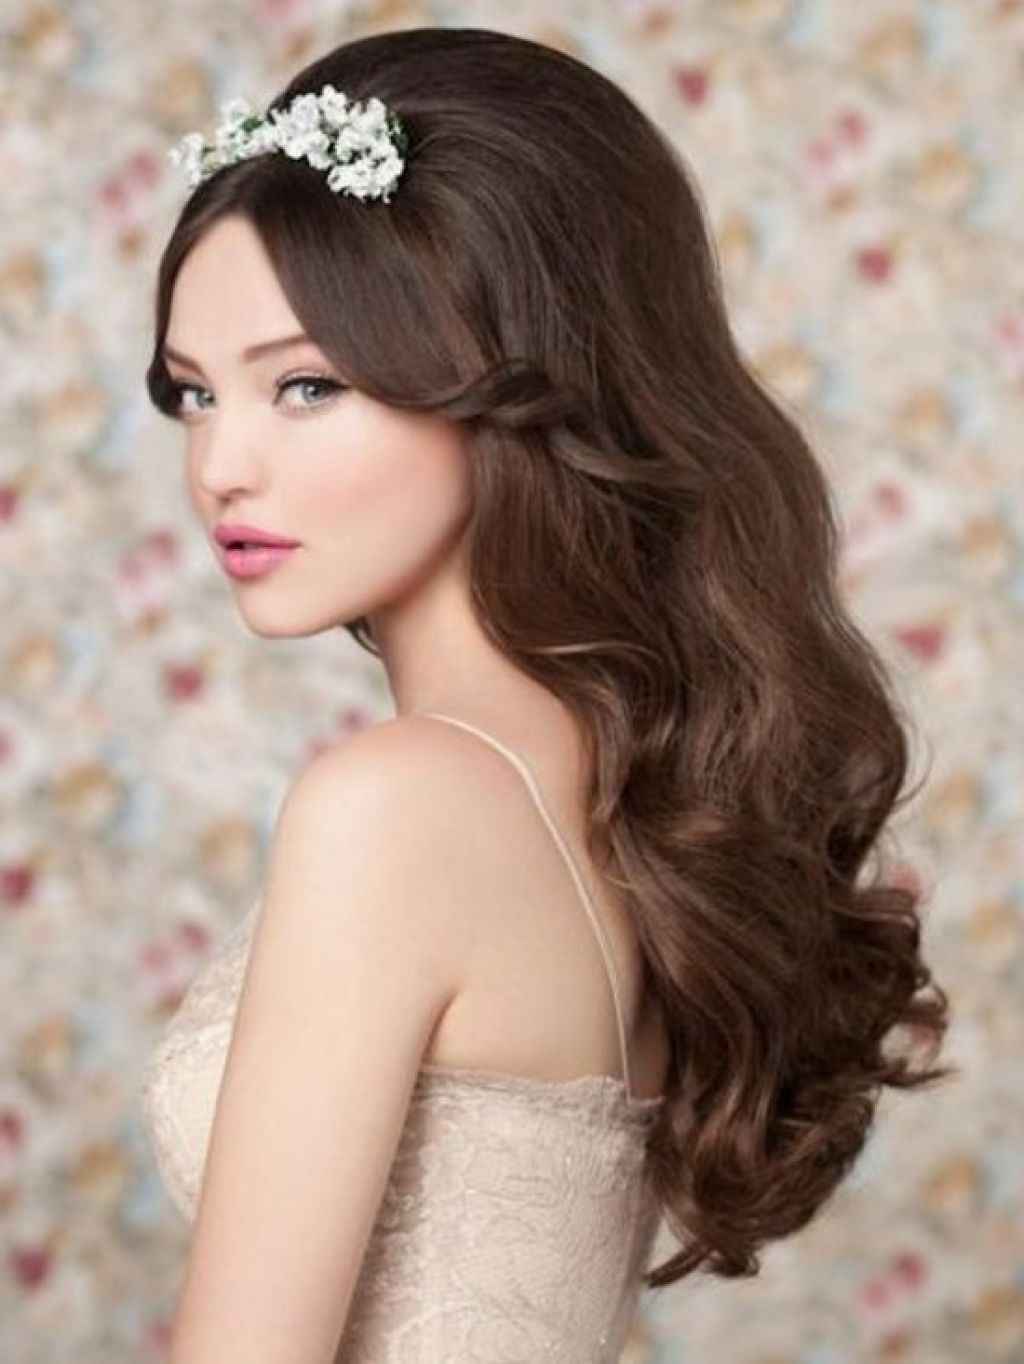 Long Hair Hairstyles For Wedding
 20 Classic Wedding Hairstyles Long Hair MagMent